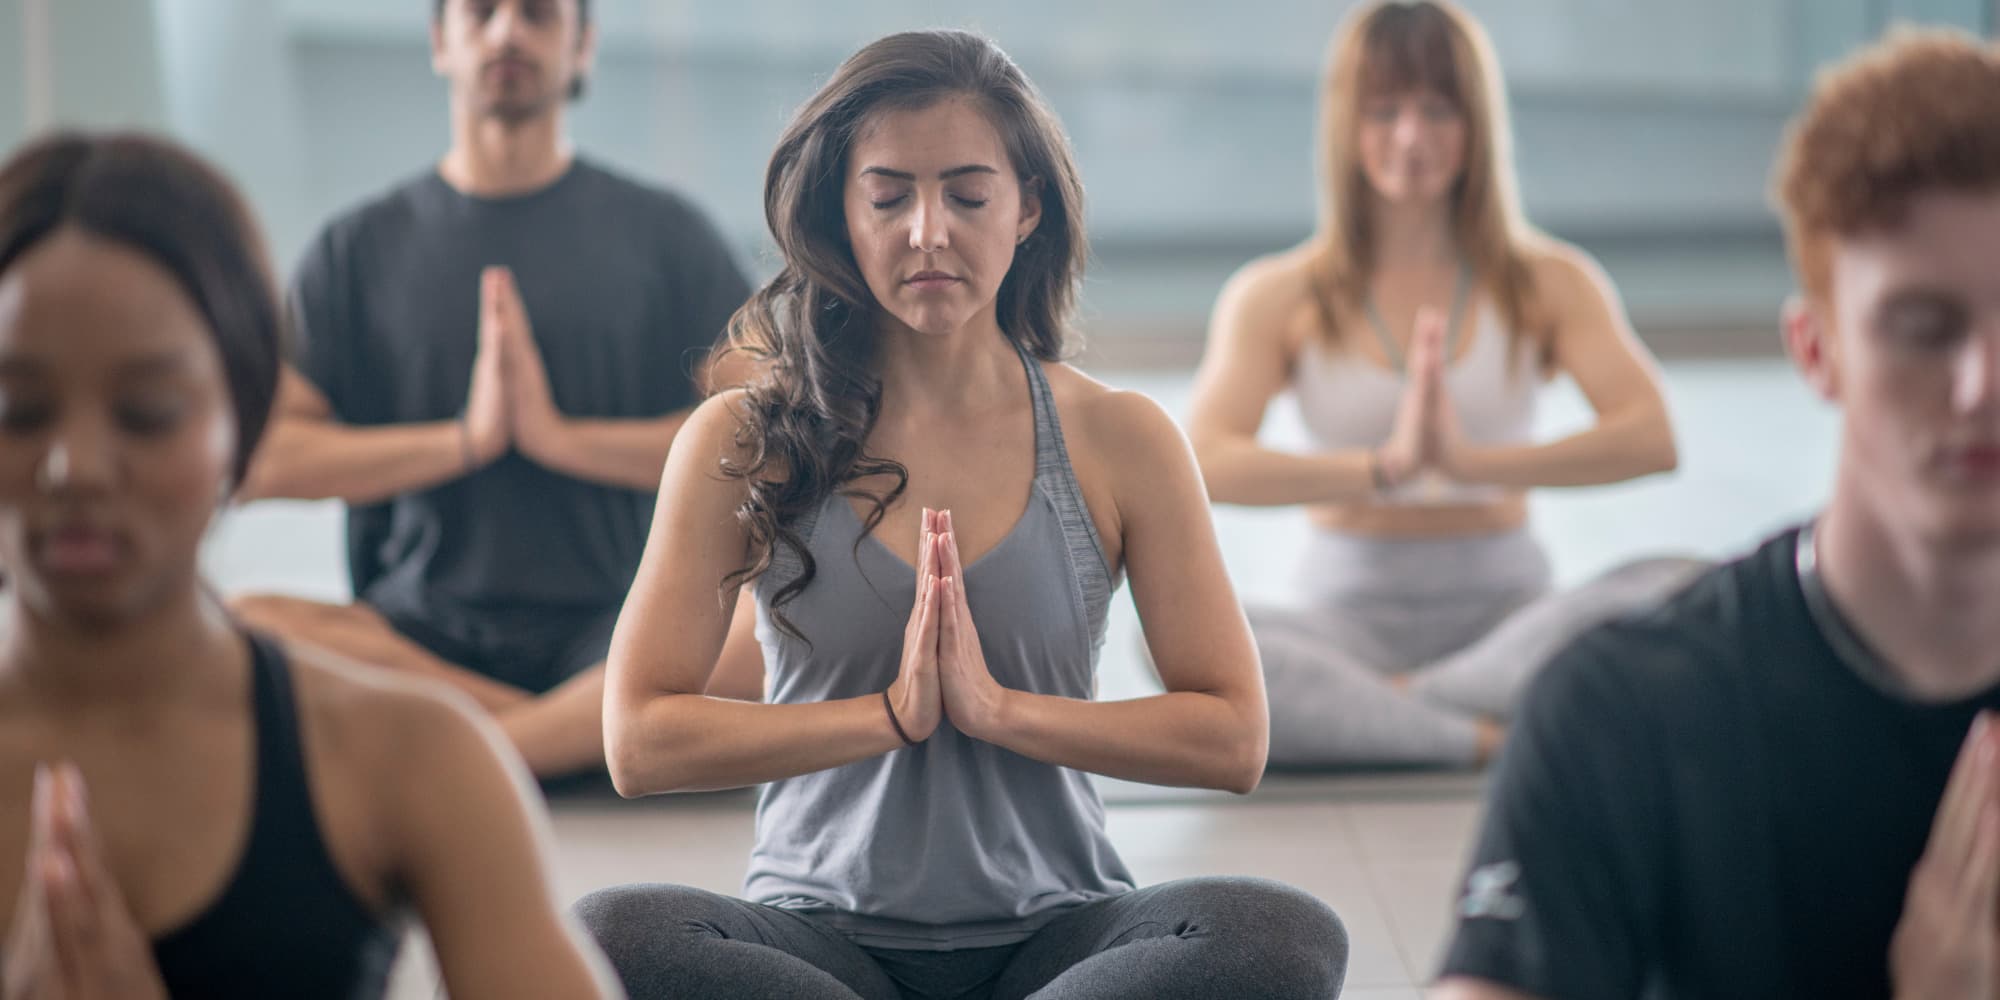 Several men and women sitting cross-legged with their hands together in a prayer pose with their eyes closed, meditating.